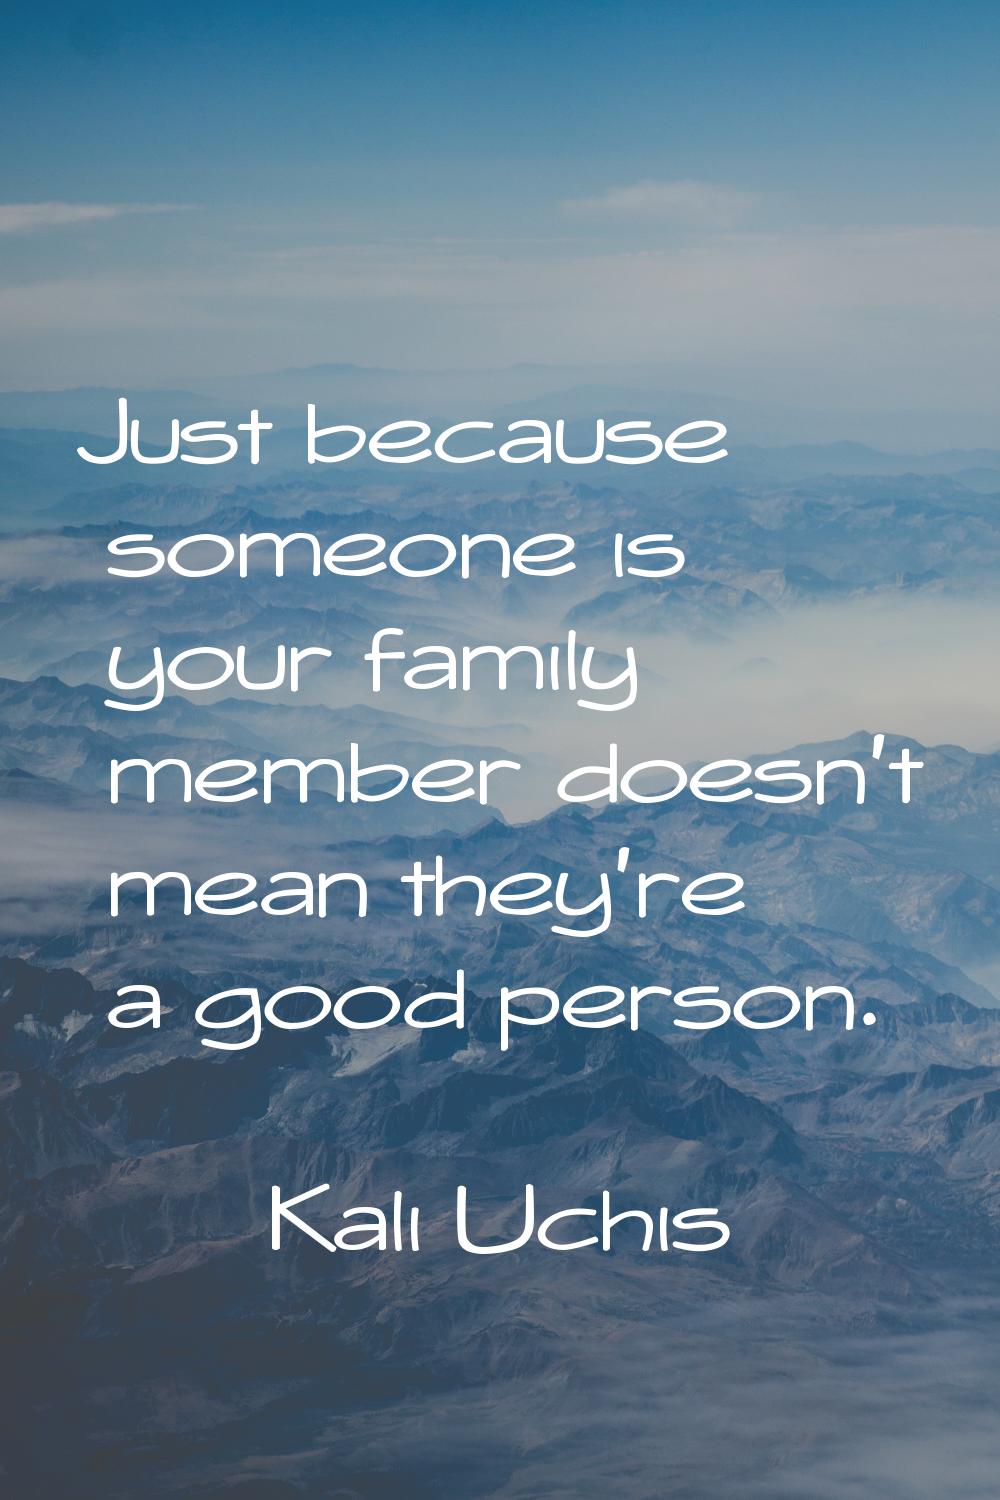 Just because someone is your family member doesn't mean they're a good person.